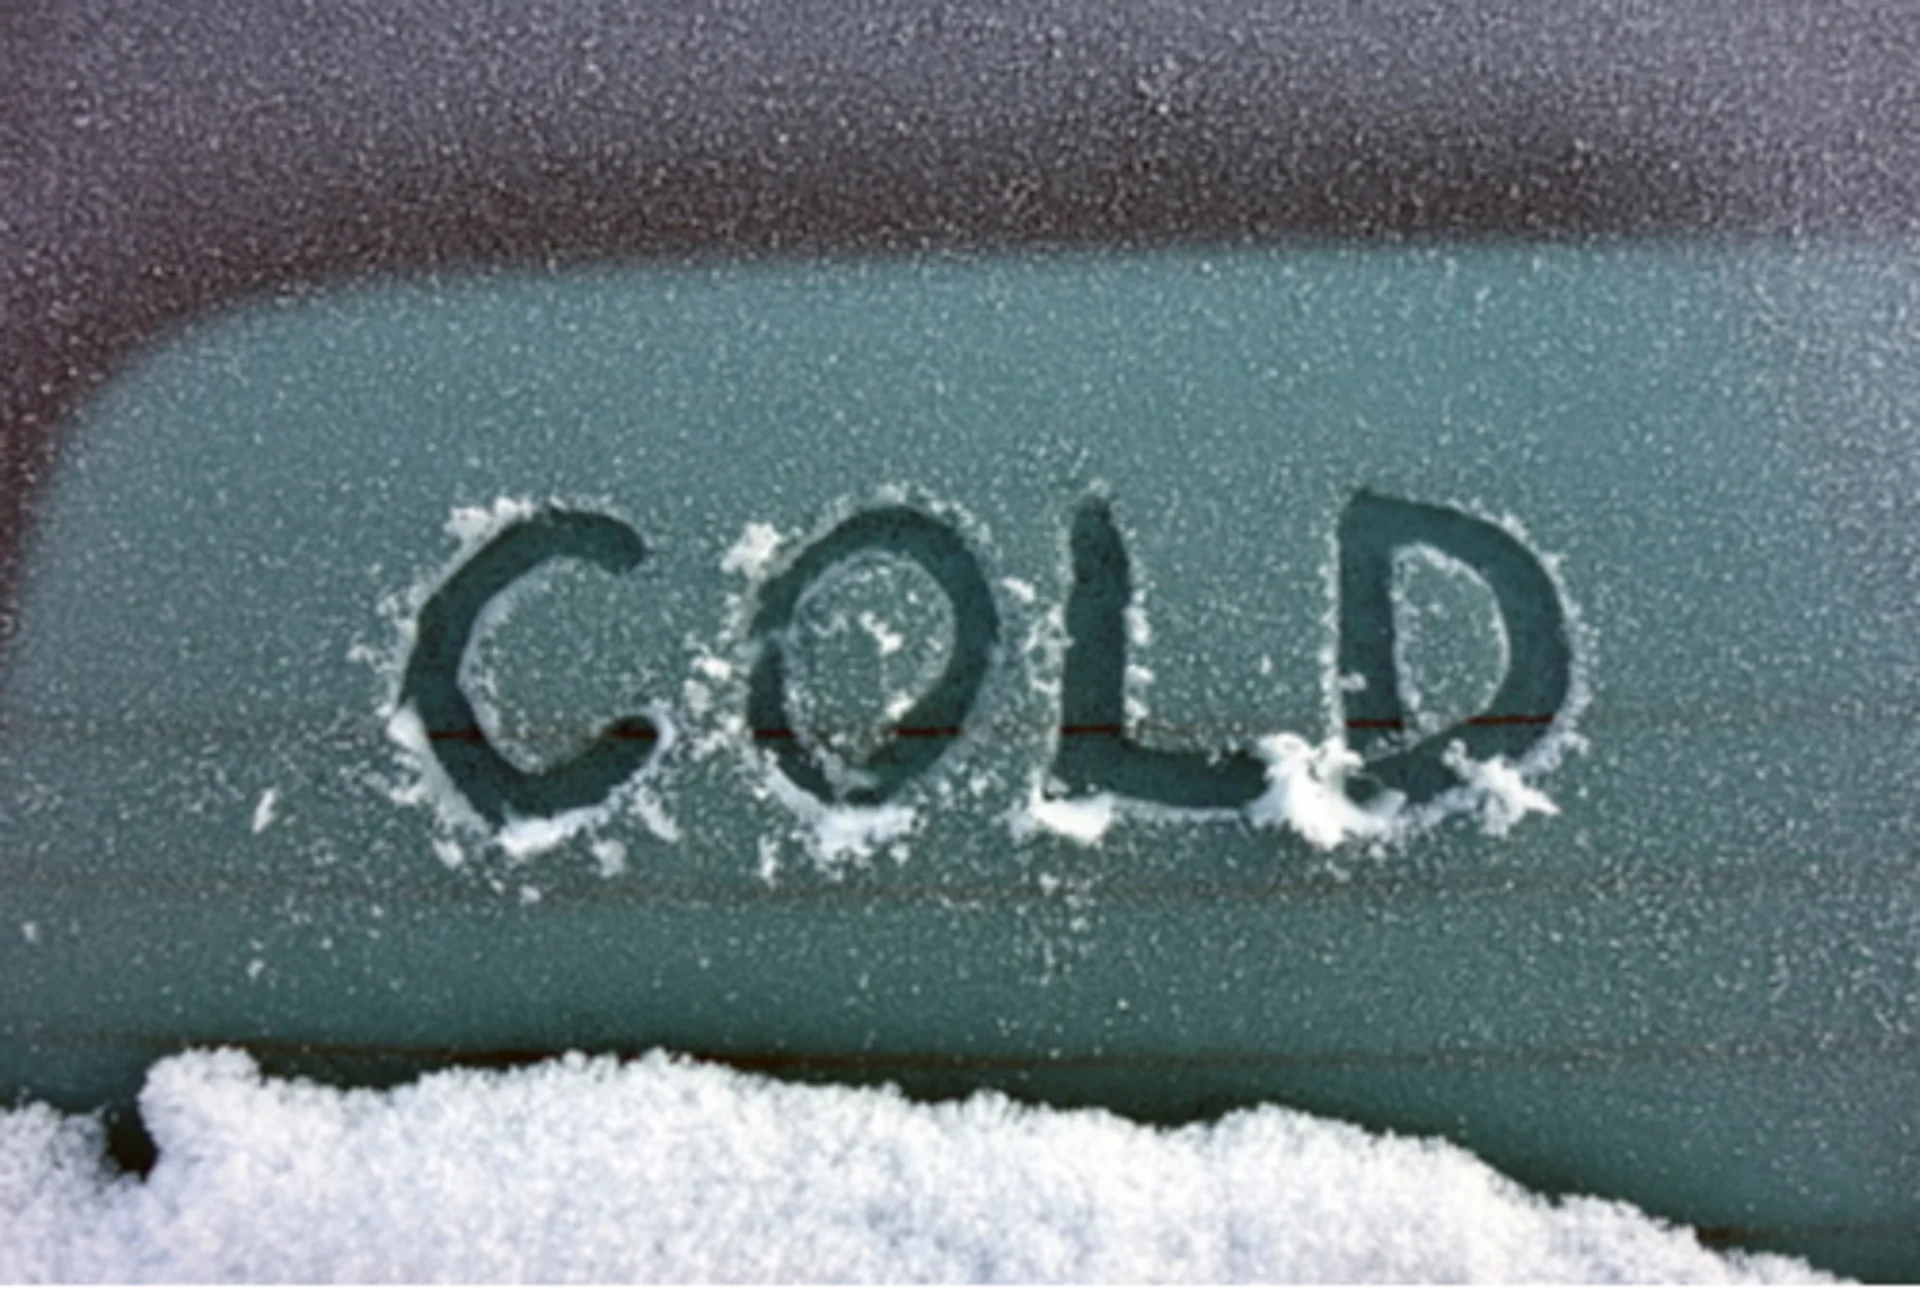 Remarkable nationwide cold closes out winter